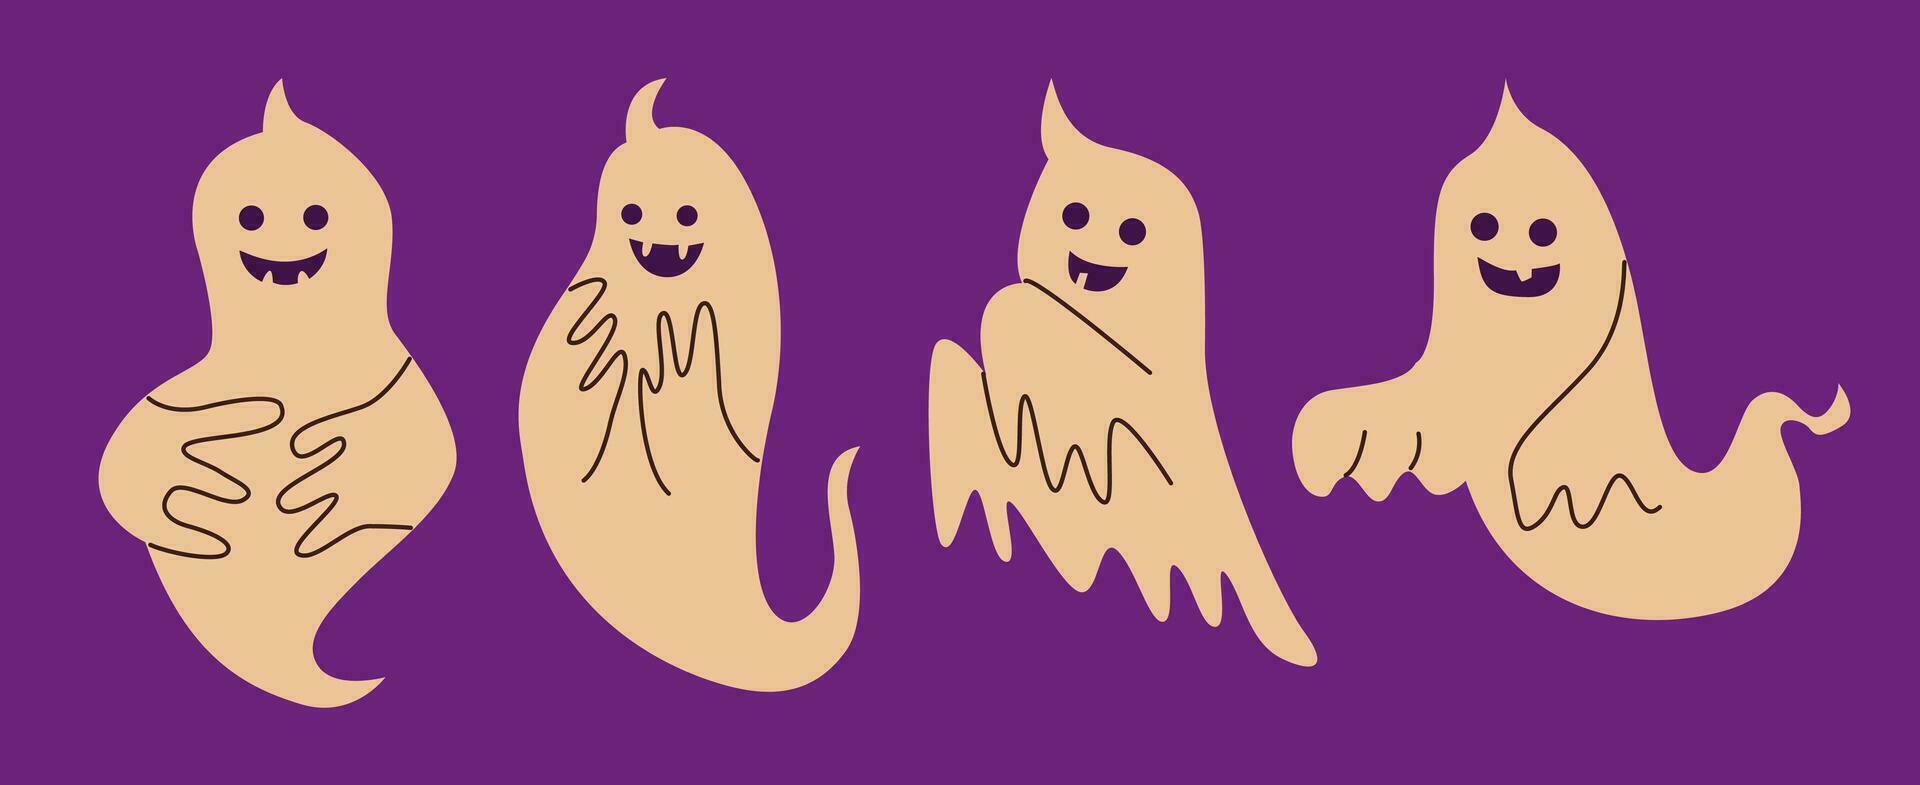 Collection of funny ghosts for Halloween decoration. Cute Halloween spirit. Flat vector illustration.